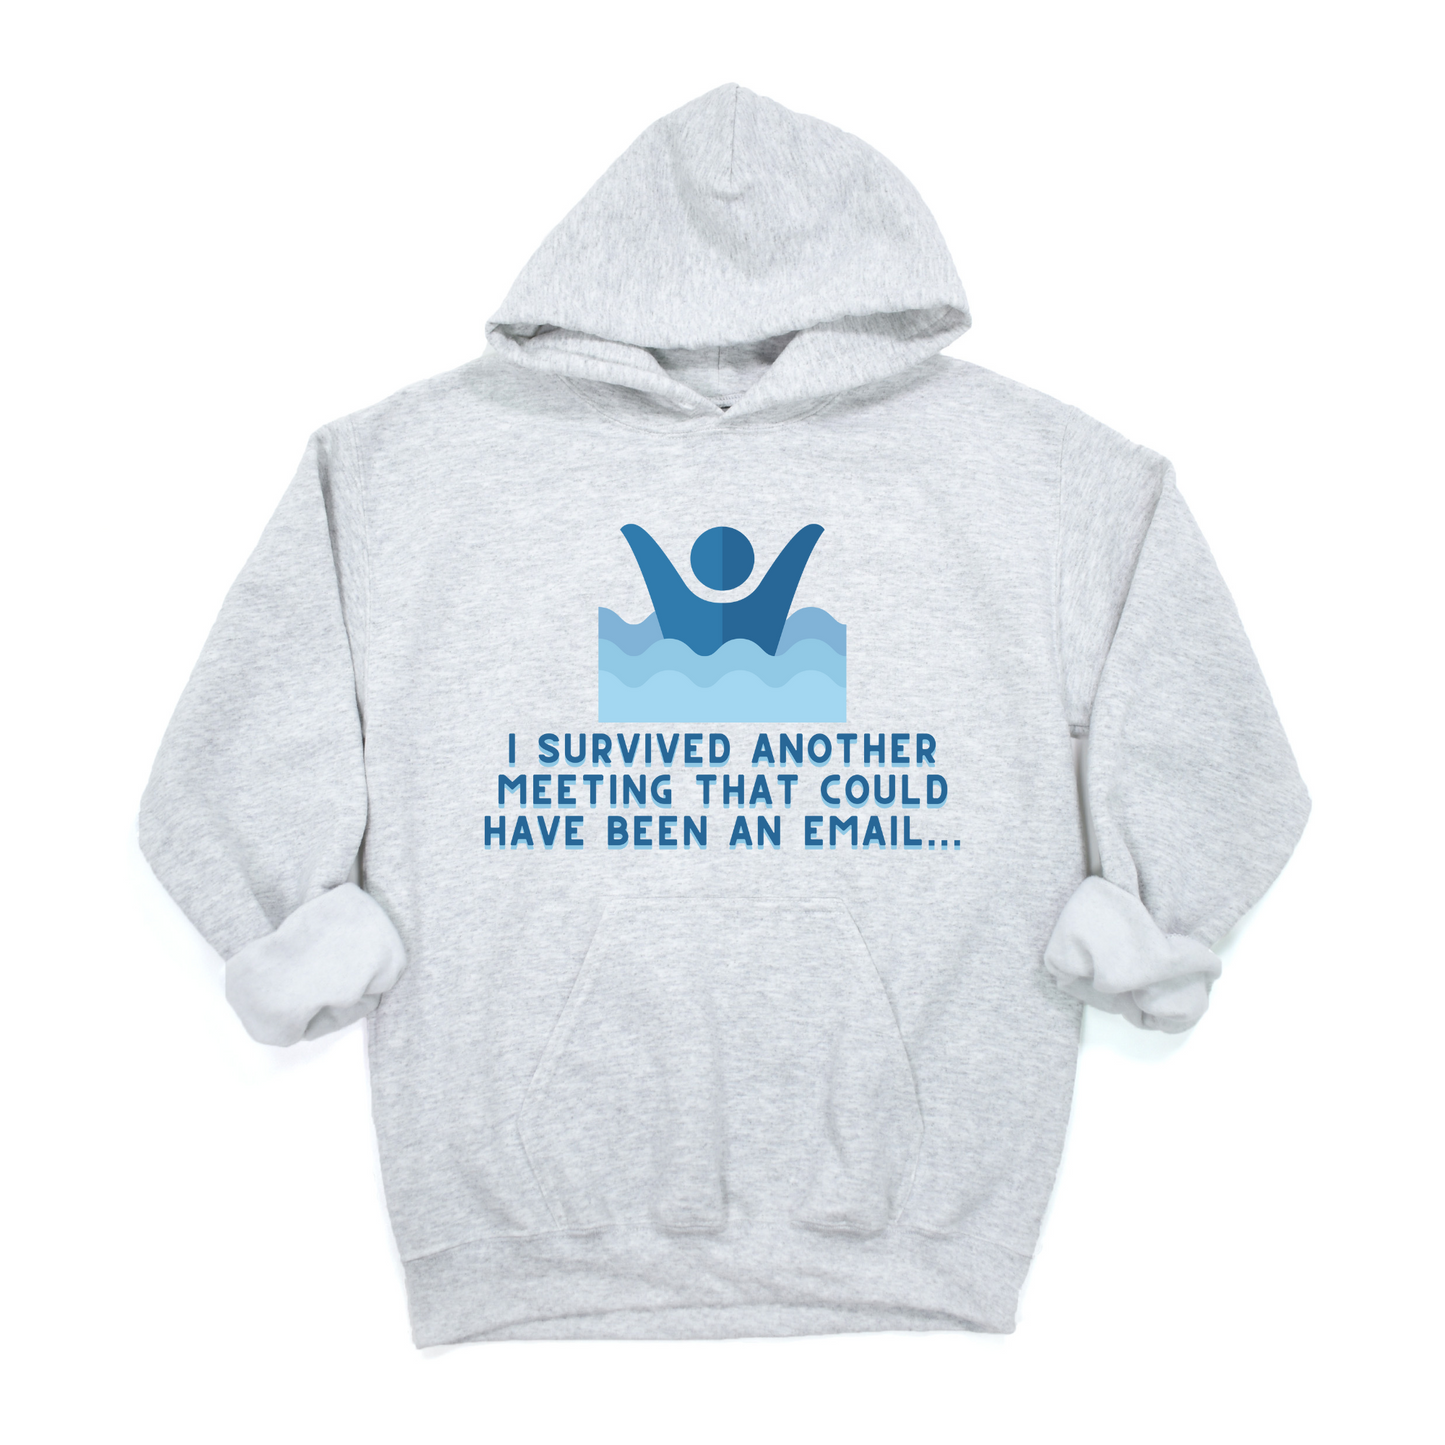 "Could Have Been An Email" Hoodie